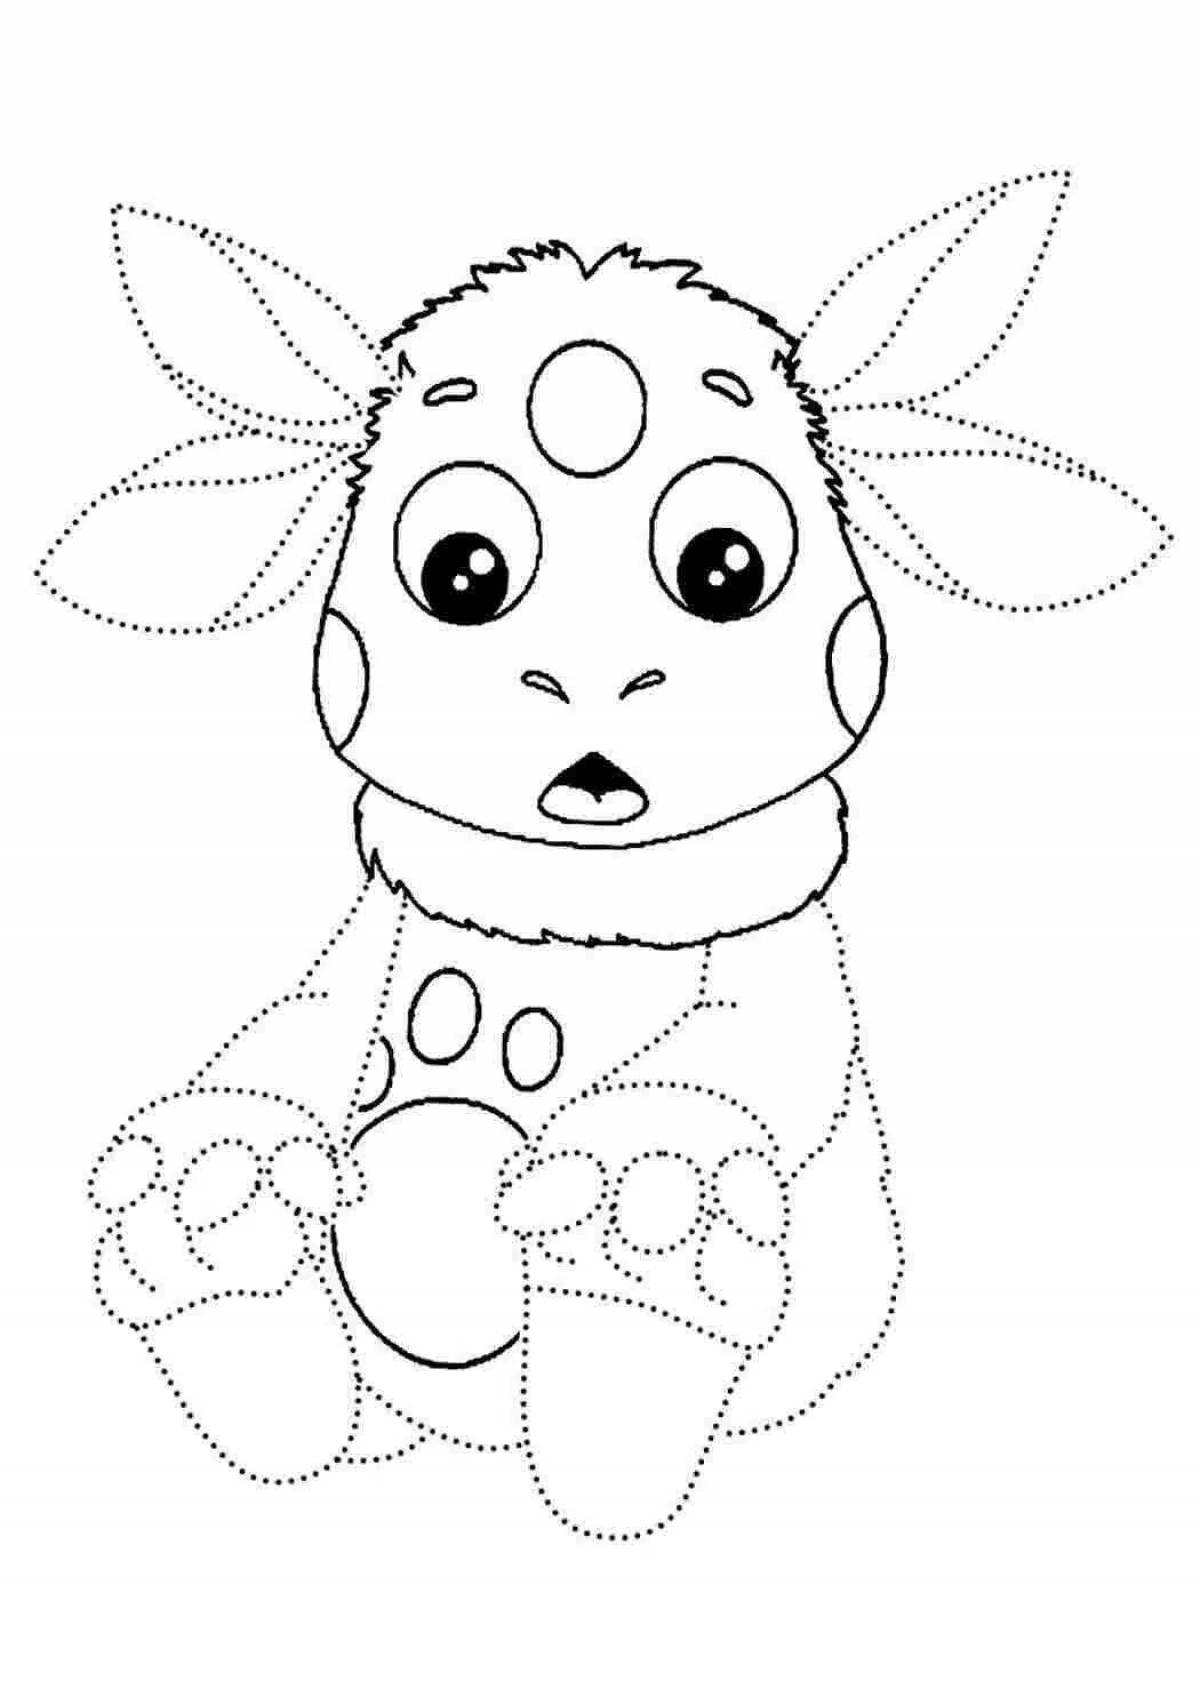 Awesome coloring pages helppic